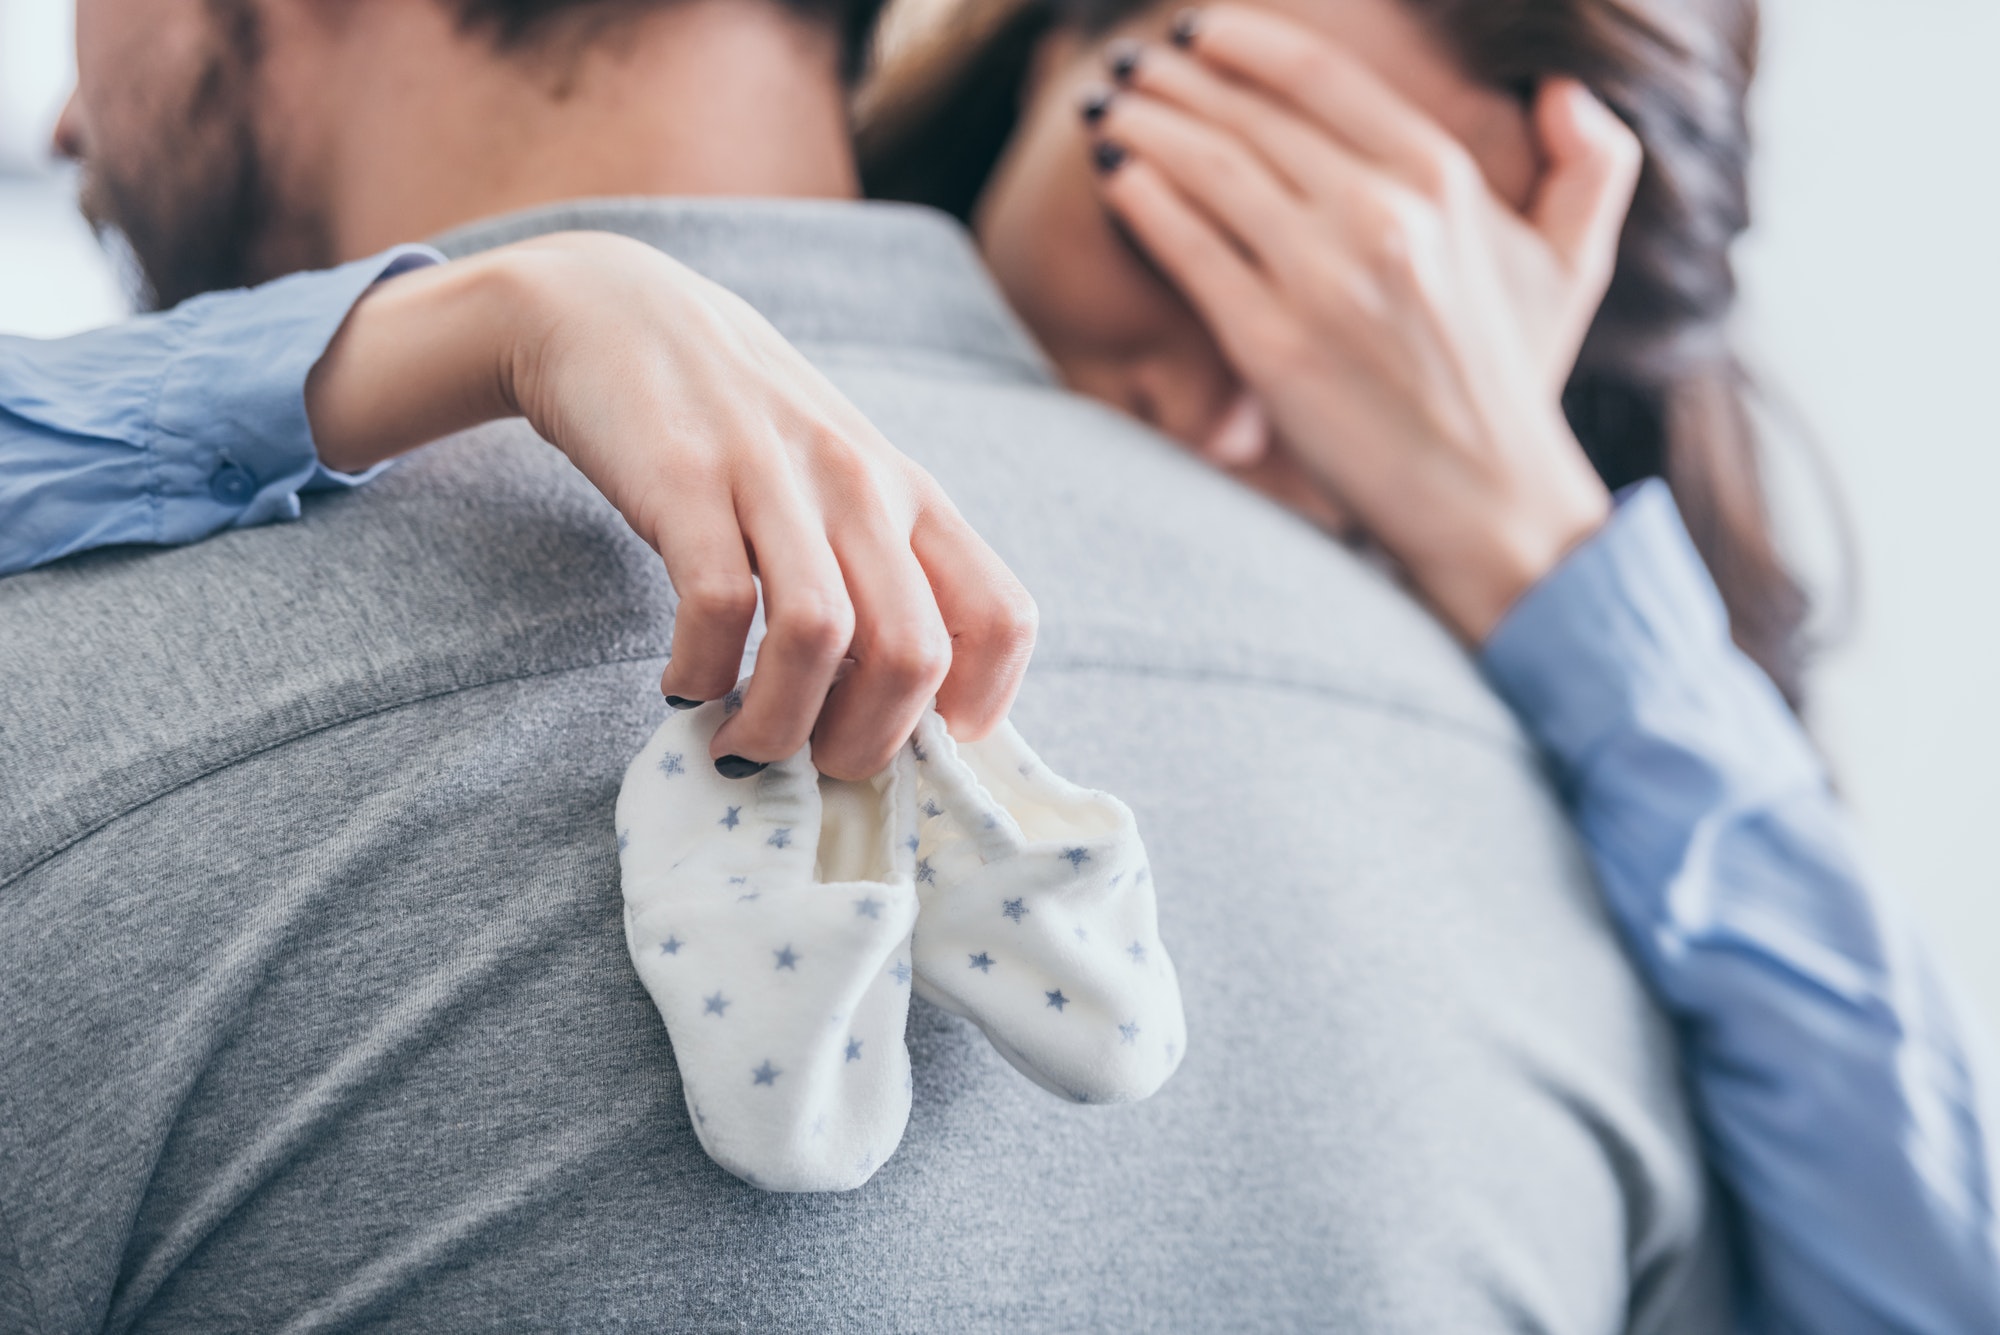 cropped view of woman, hugging man, holding baby socks and crying in room, grieving disorder concept